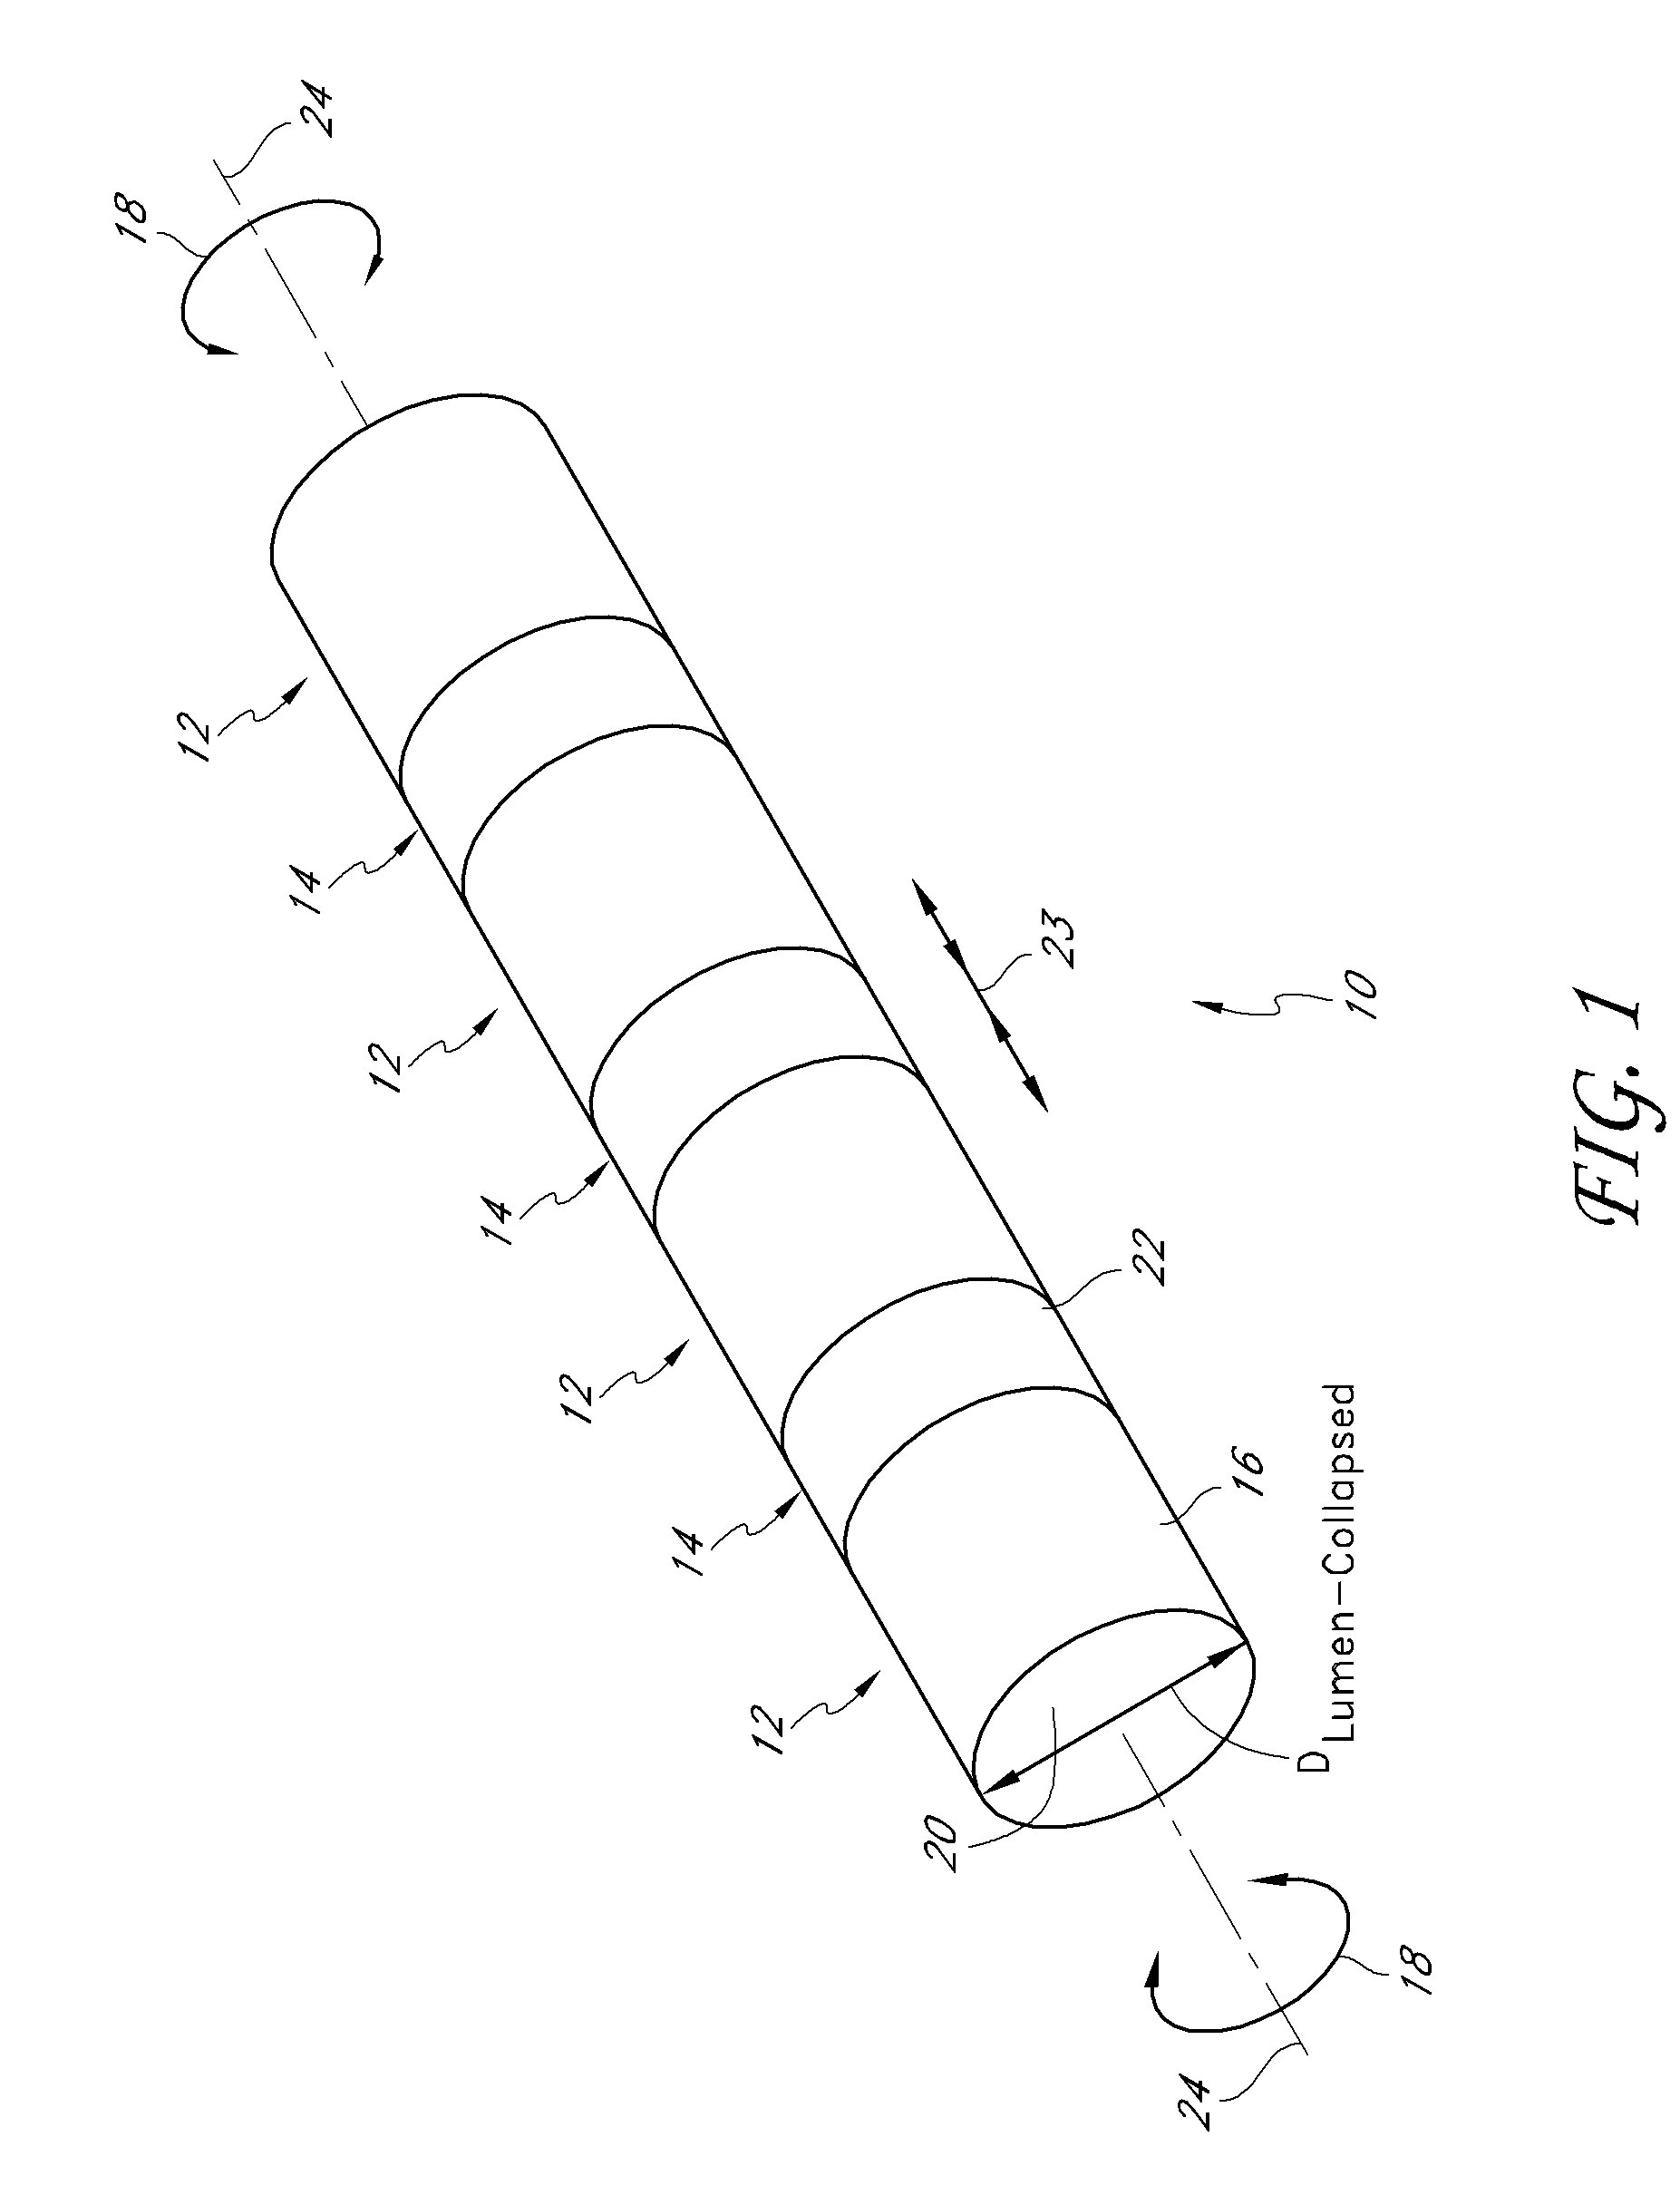 Axially-radially nested expandable device